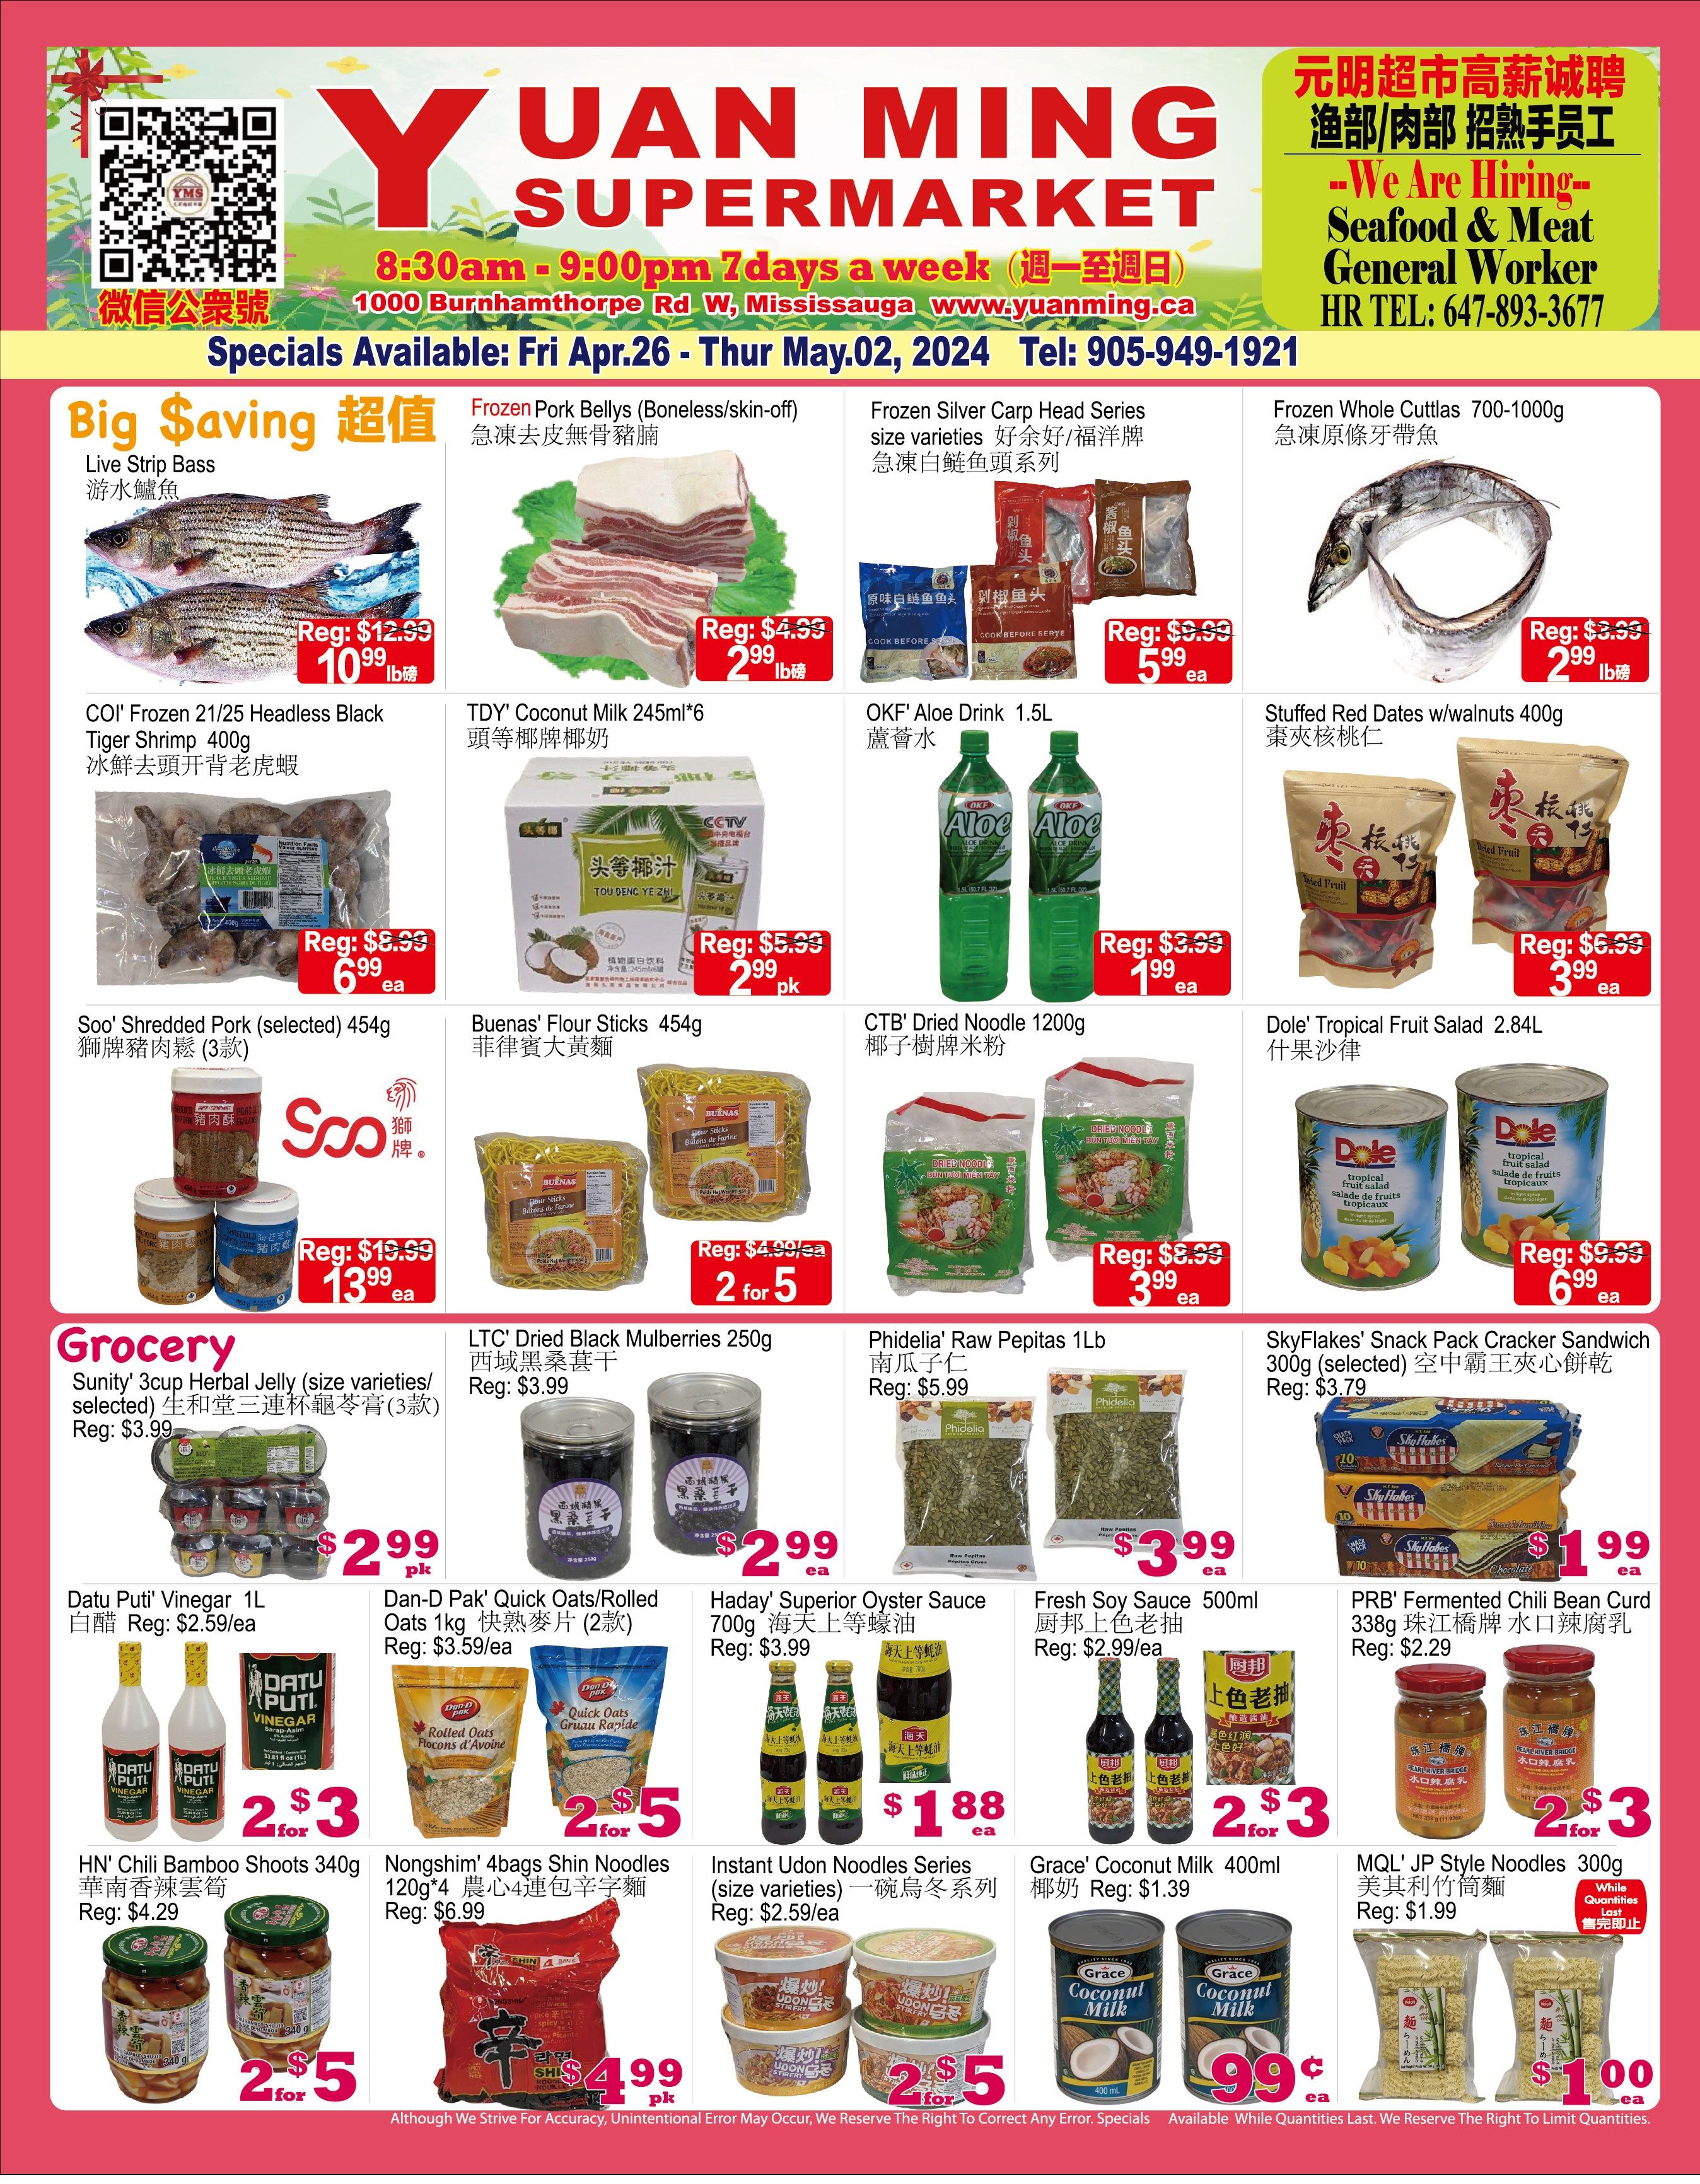 Yuan Ming Supermarket - Weekly Flyer Specials